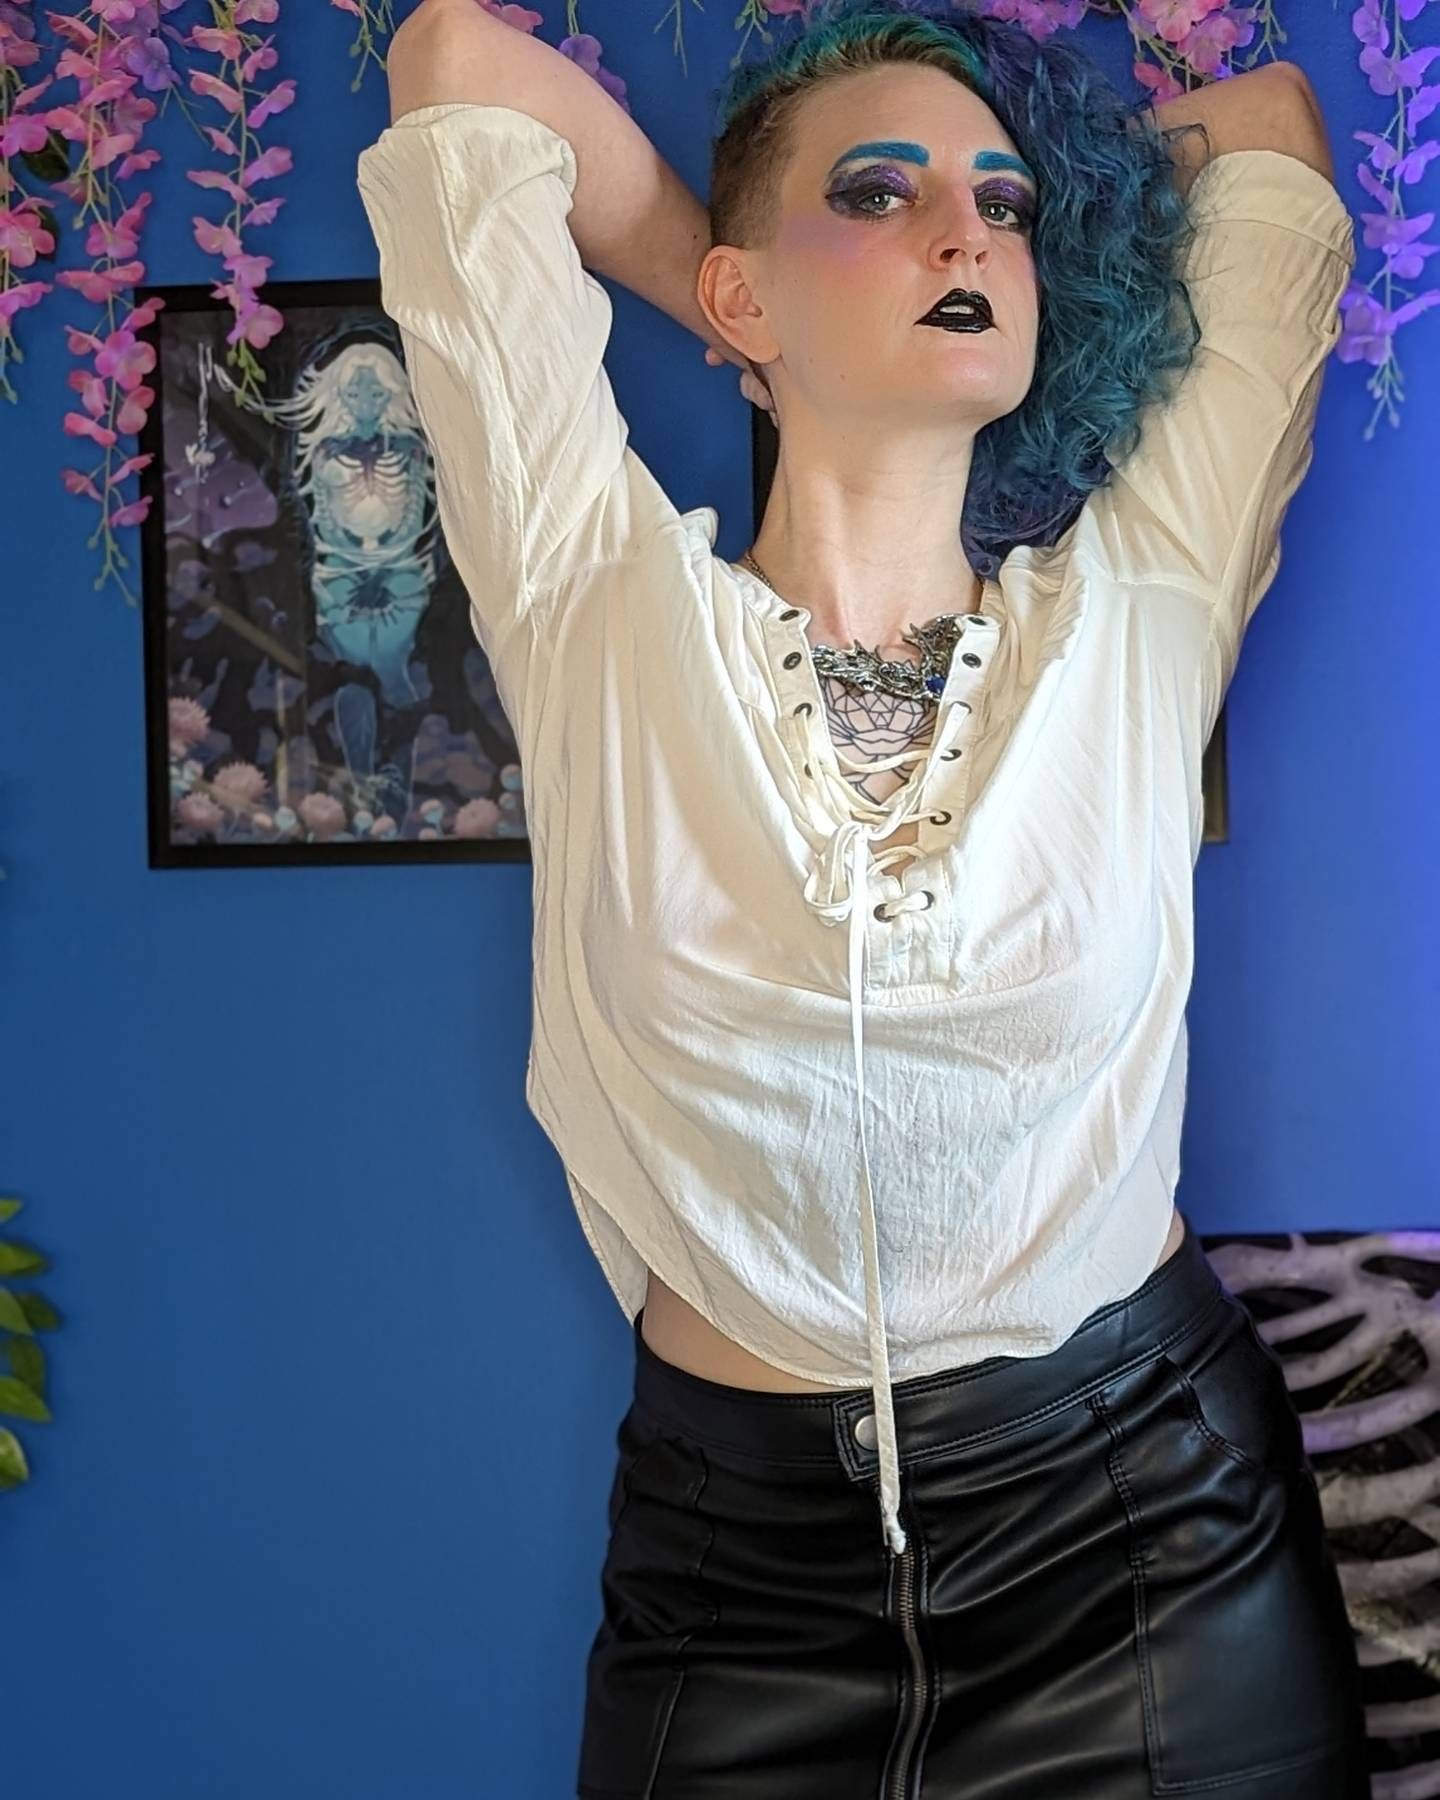 Testing outfits for fair time. #bluehair #goth #blacklipstick #blueeyes